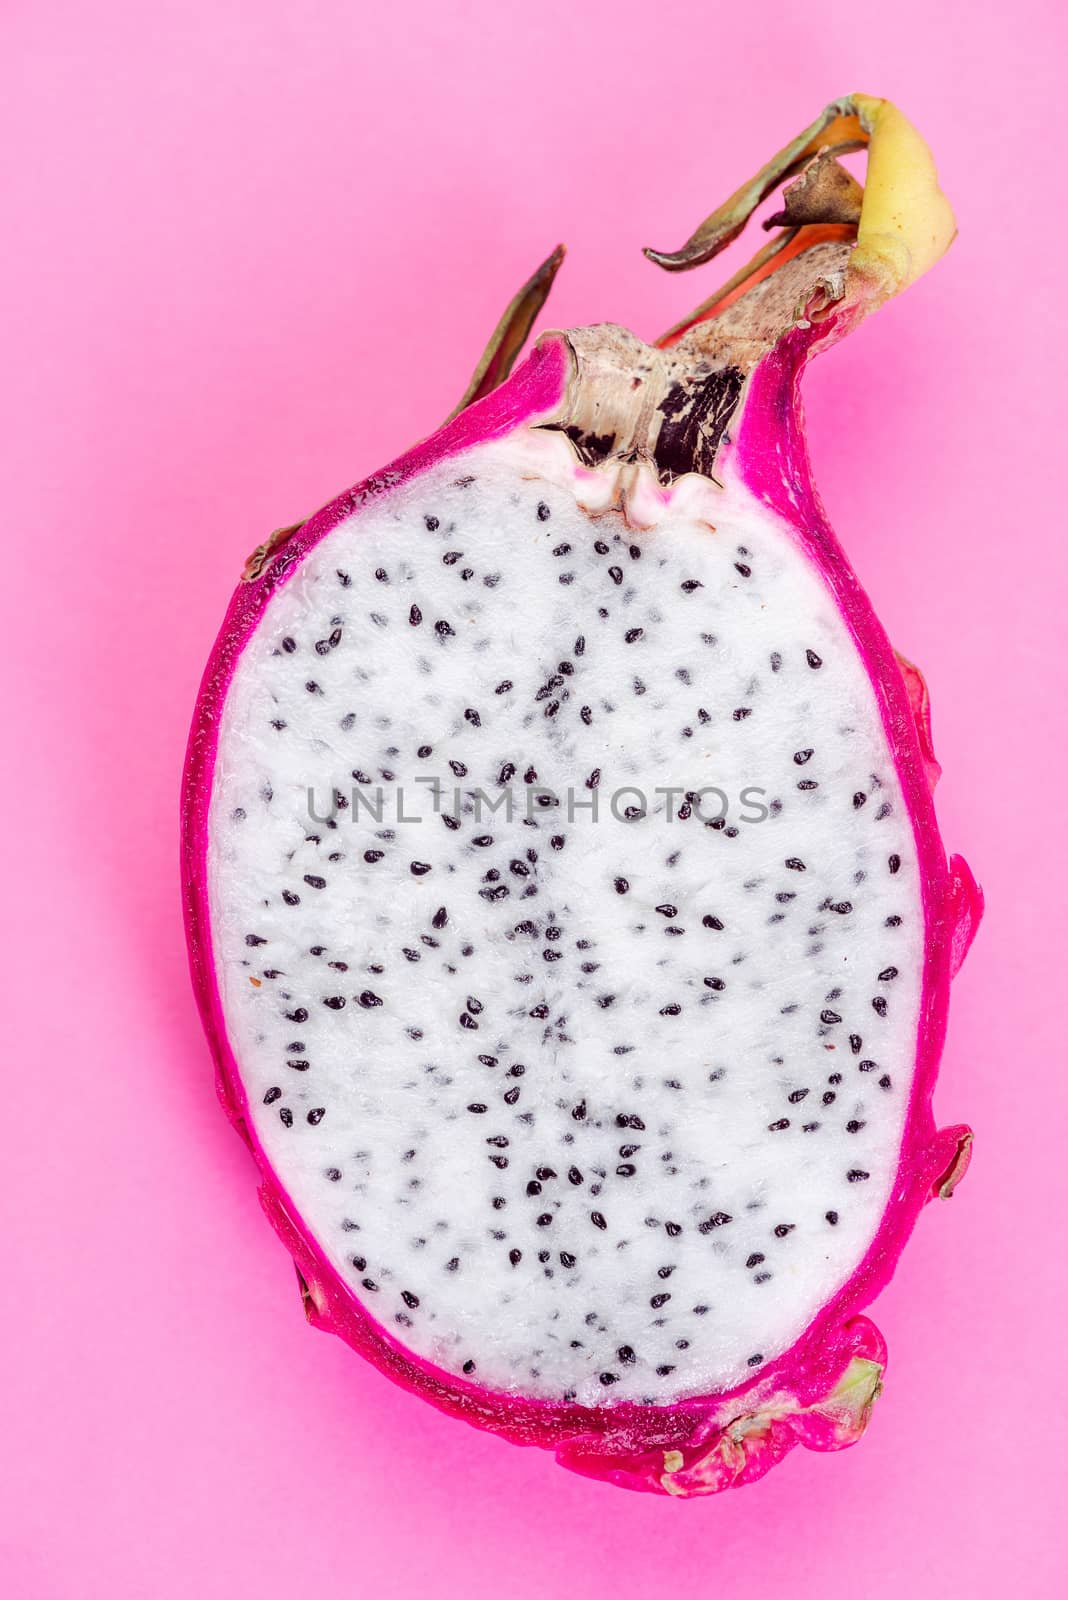 Pitahaya or Dragon Fruit Cut in Half on Pink Pastel Background. Flat Lay. Healthy Exotic Fruits.